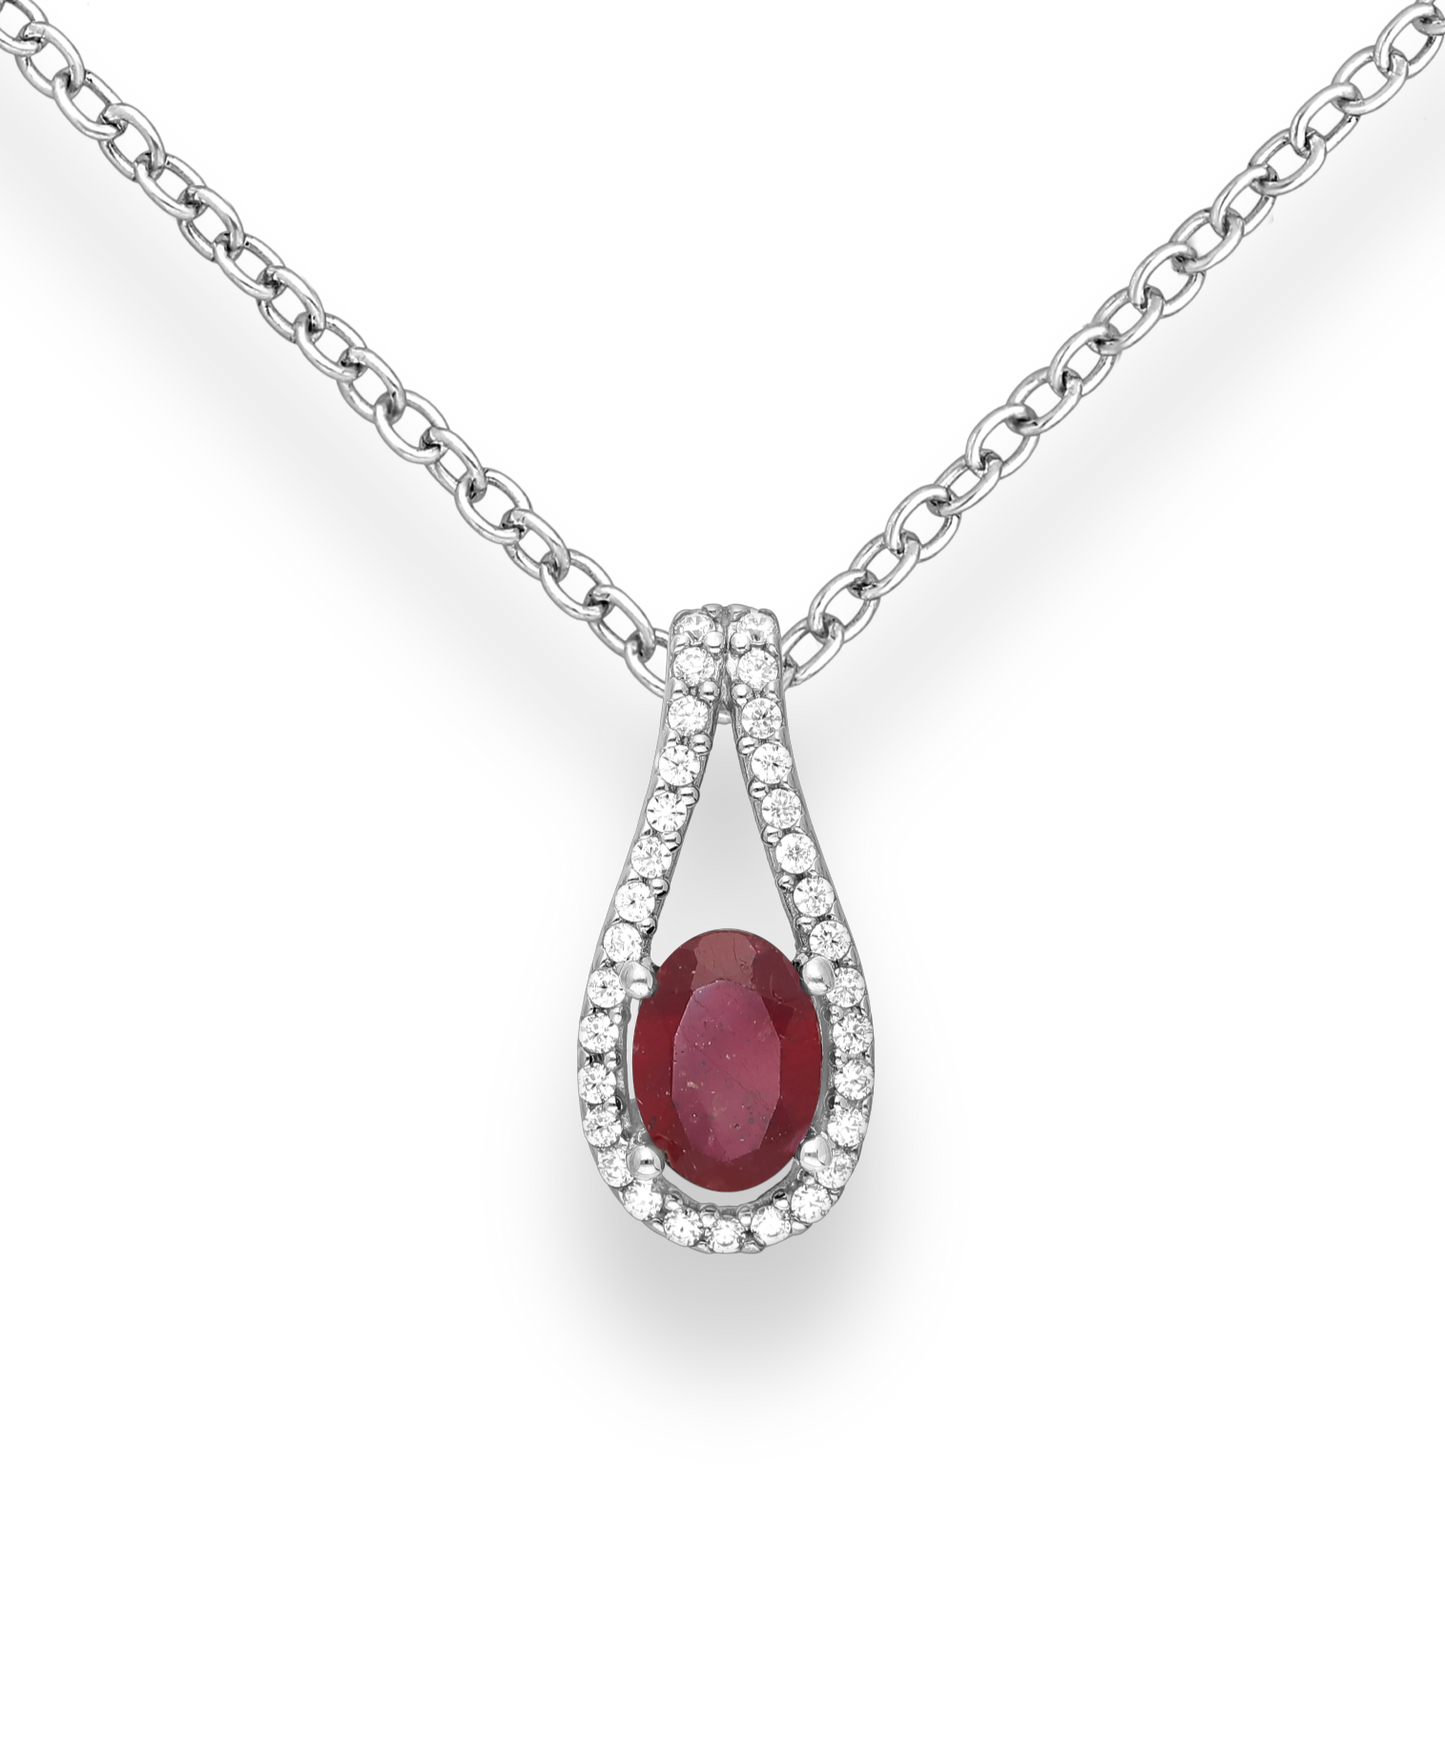 Genuine Ruby and CZ Simulated Diamonds Sterling Silver Pendant